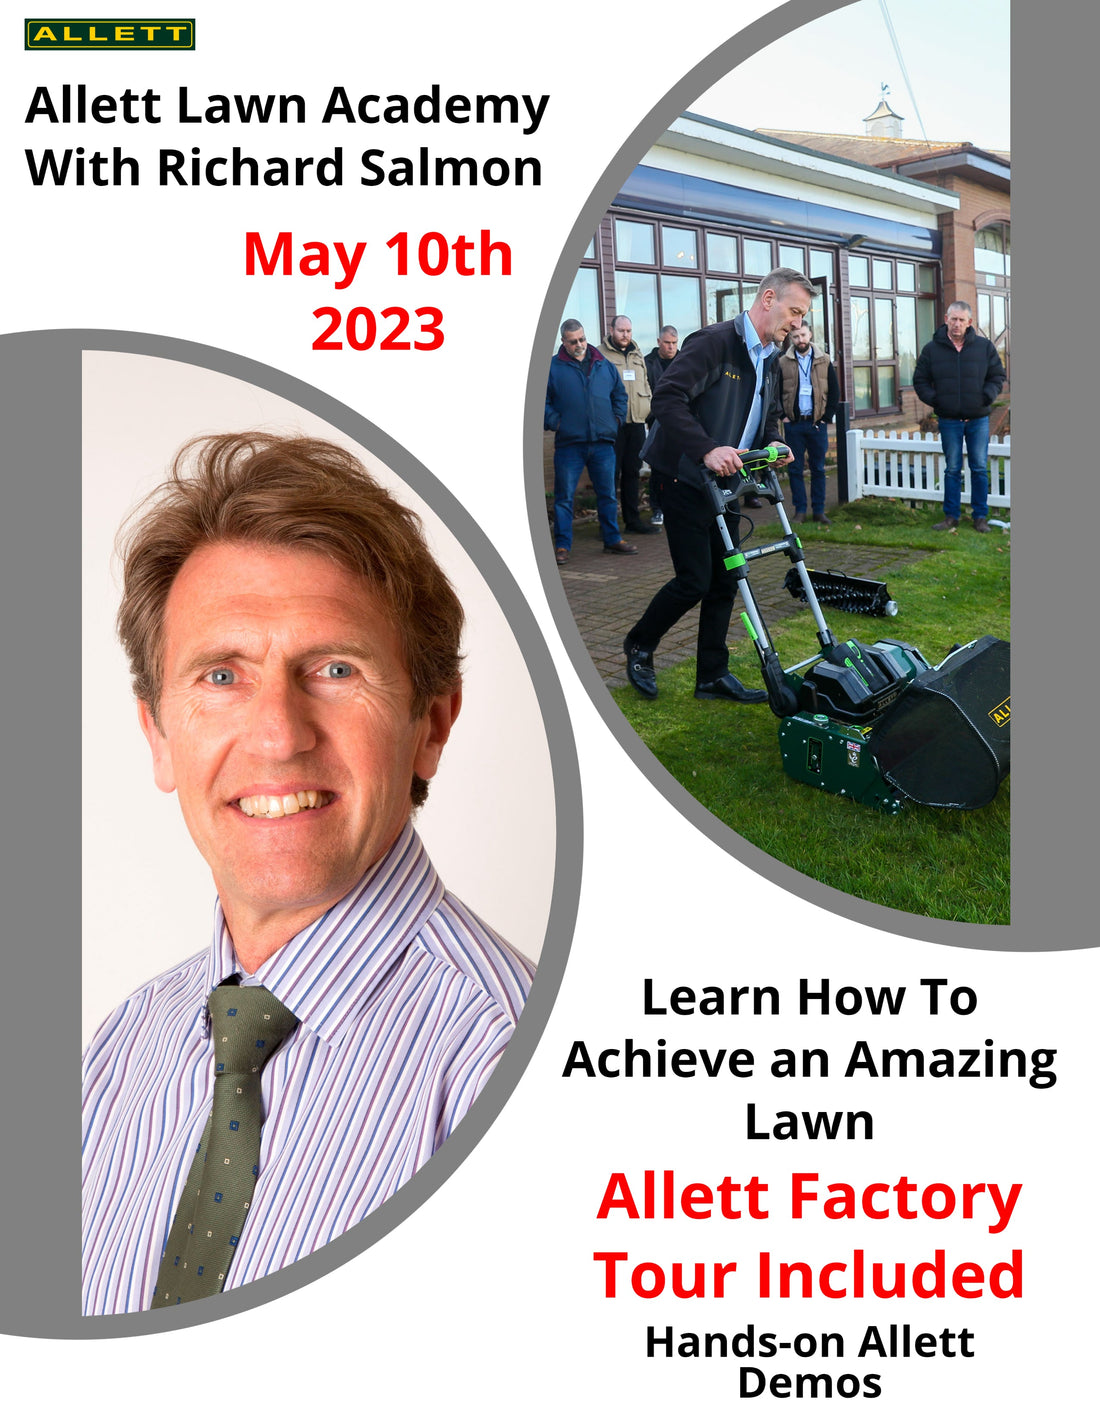 Take Your Lawn To The Next Level: Join Allett's Lawn Academy Day with Expert Richard Salmon on May 10th